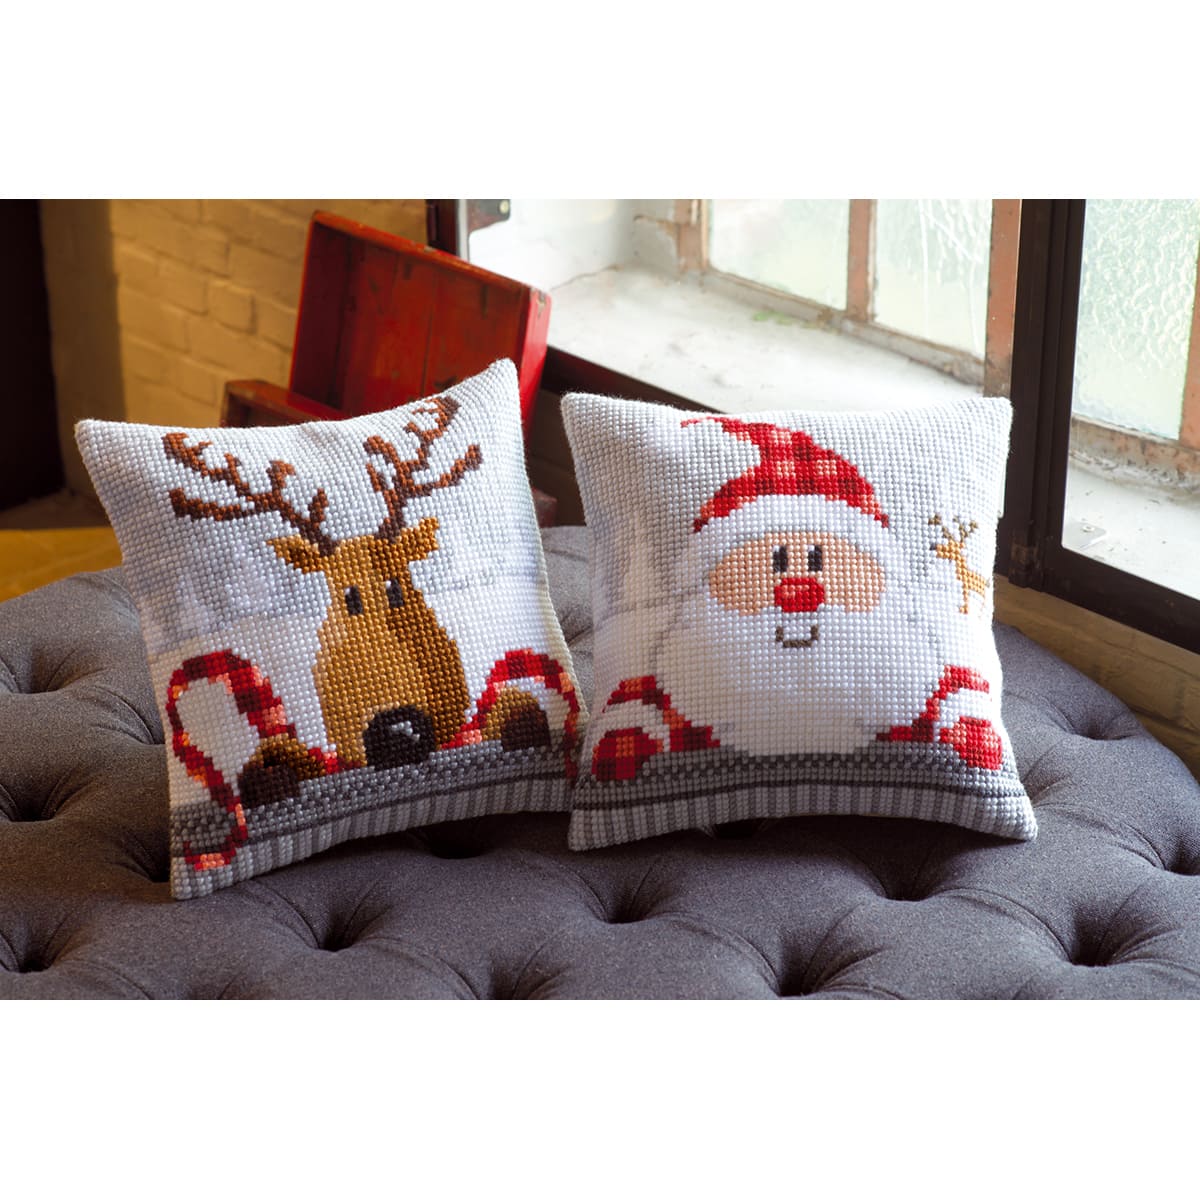 Vervaco Reindeer with a Red Scarf Needlepoint Cushion Top Kit